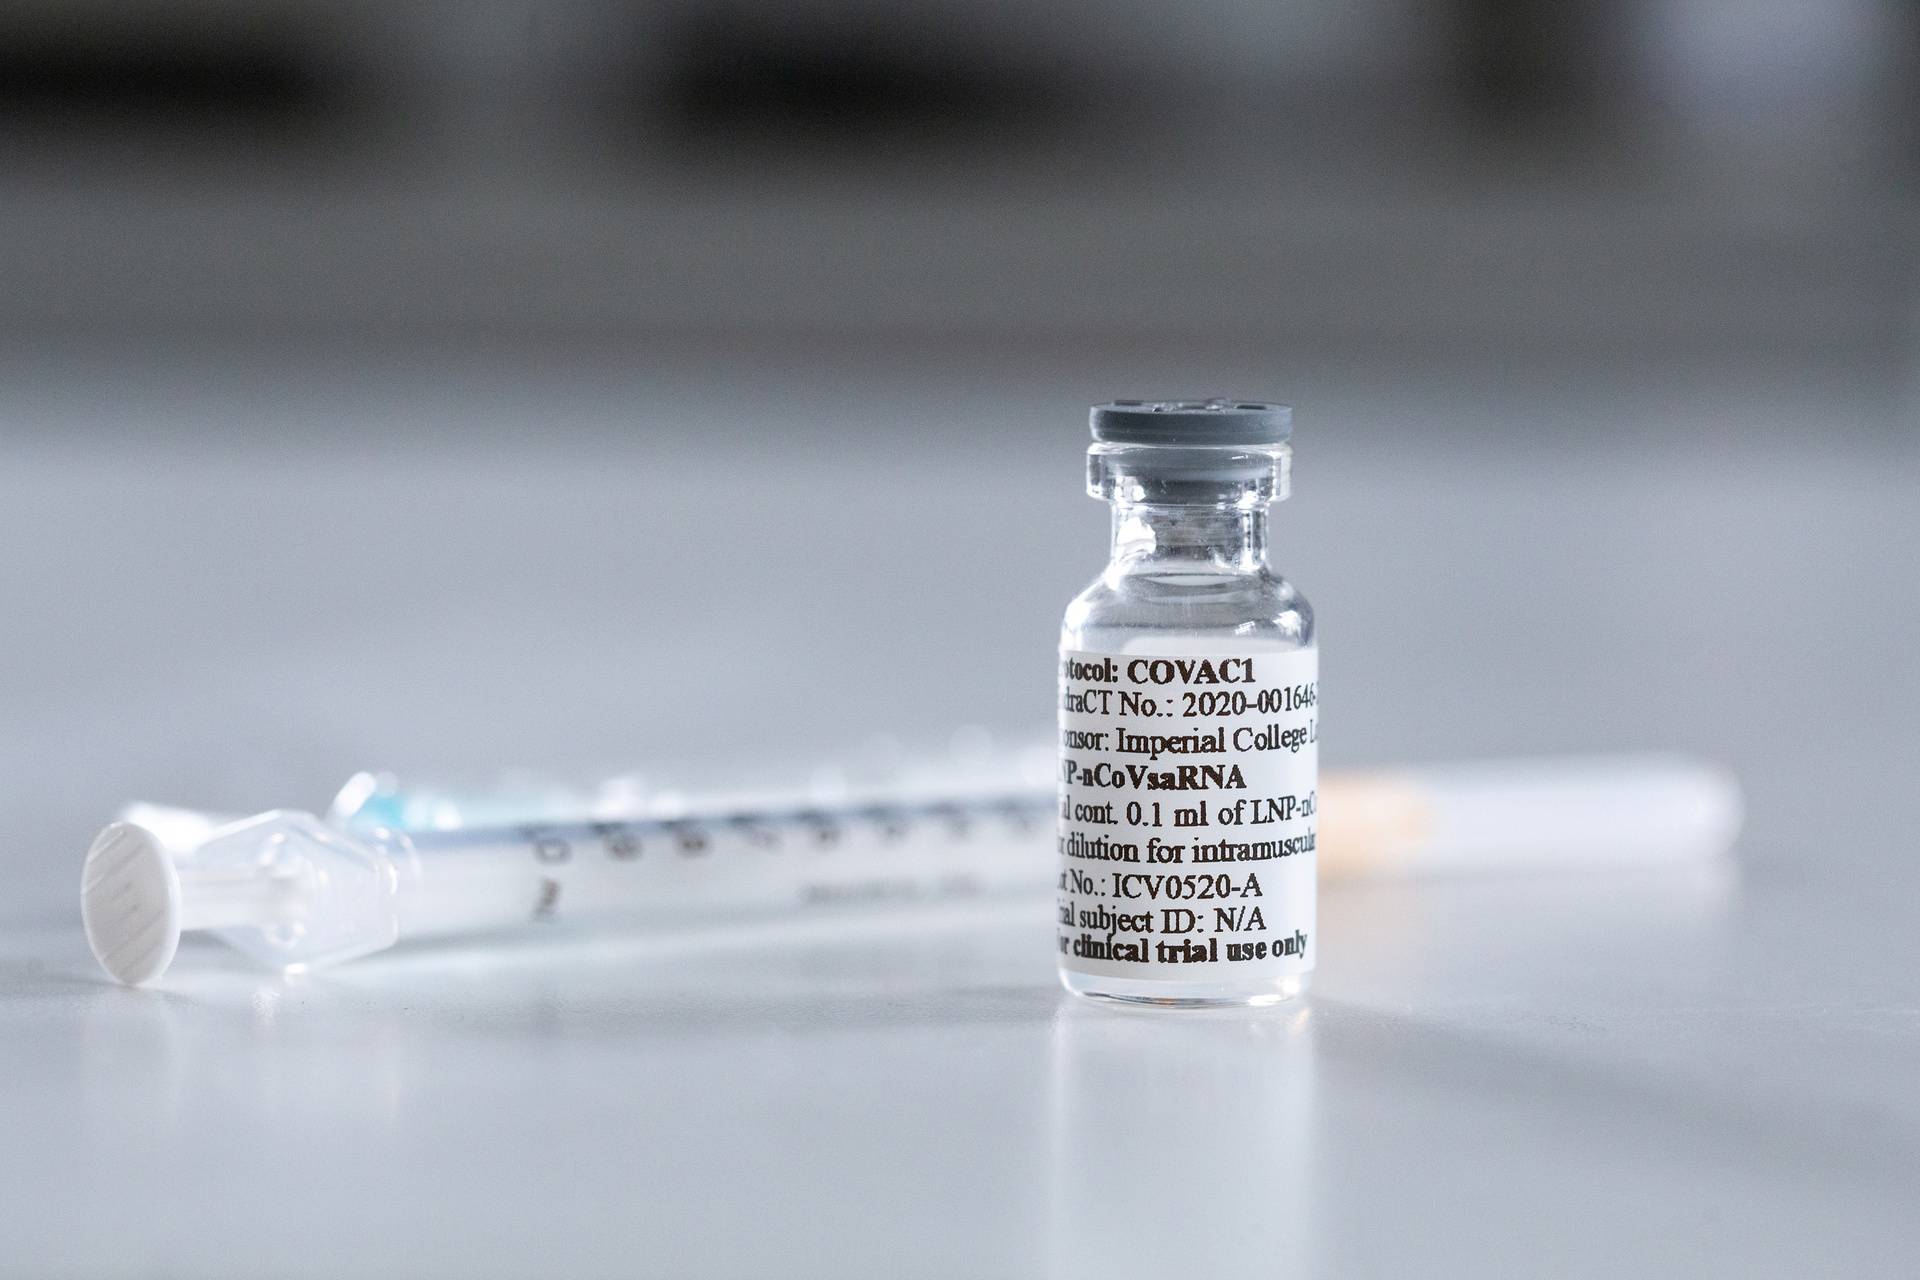 A vial with potential vaccine for the coronavirus disease (COVID-19) is pictured at the Imperial College London